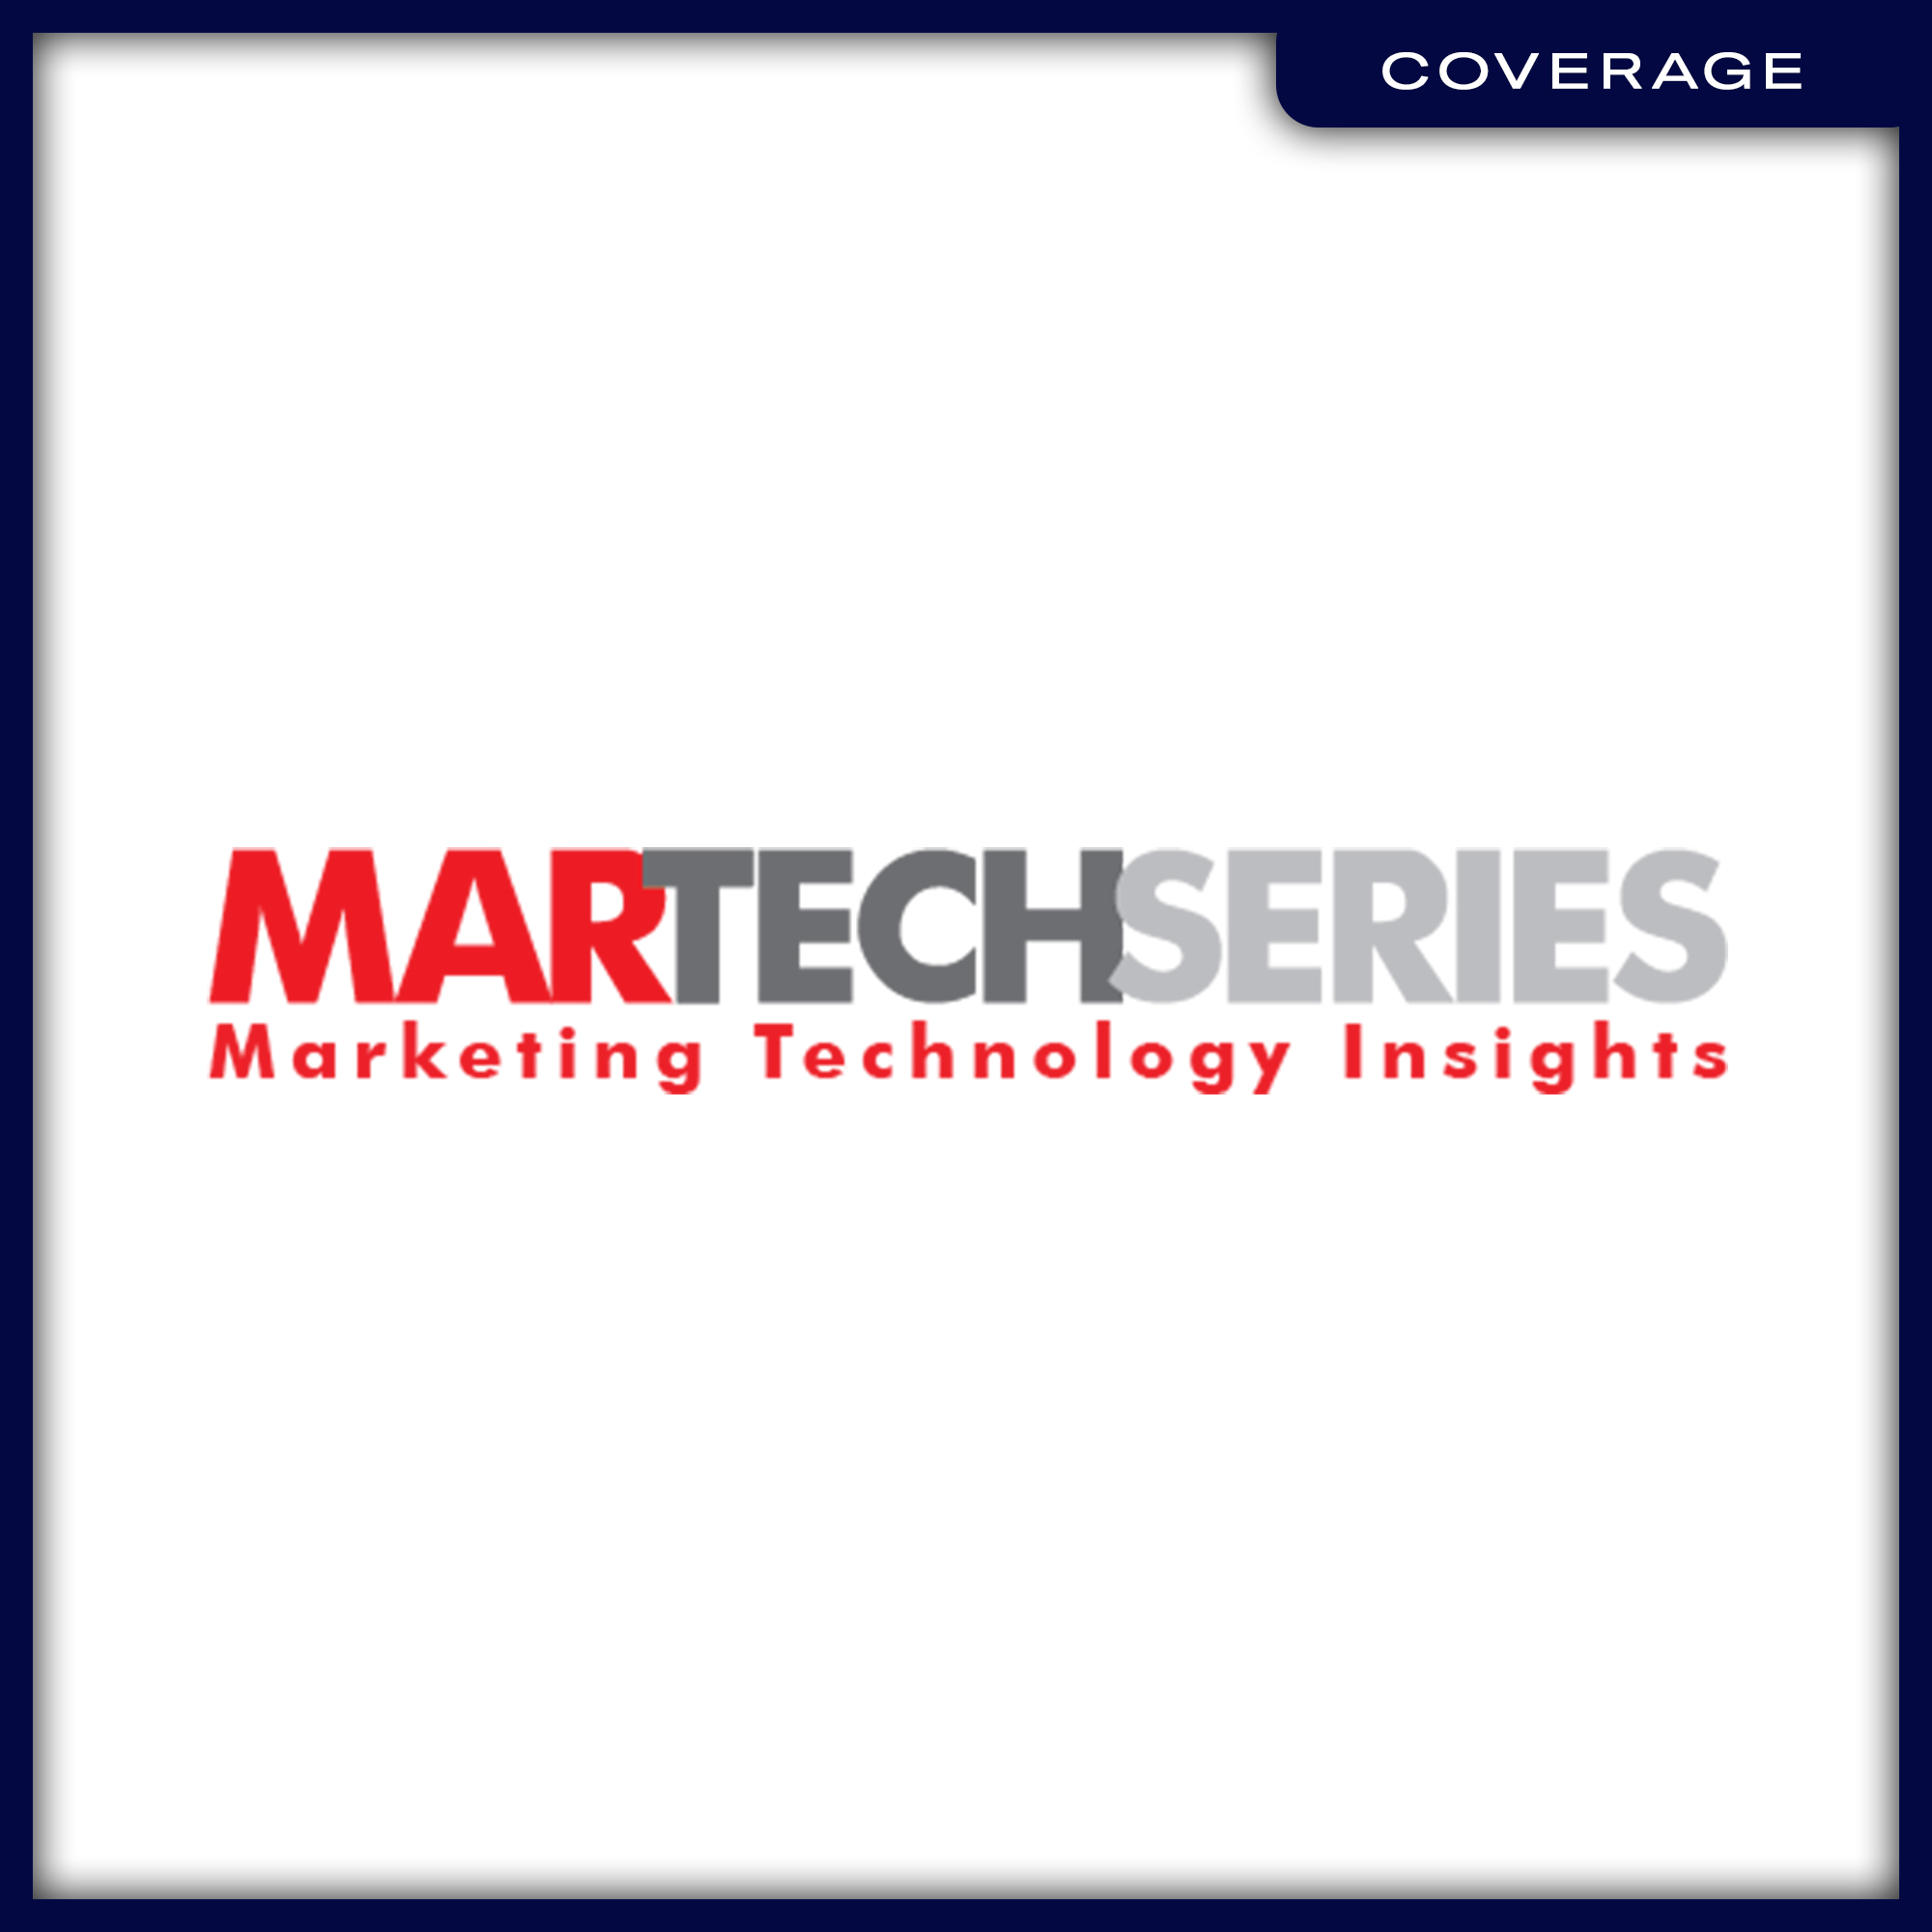 21_Coverage_MartechSeries